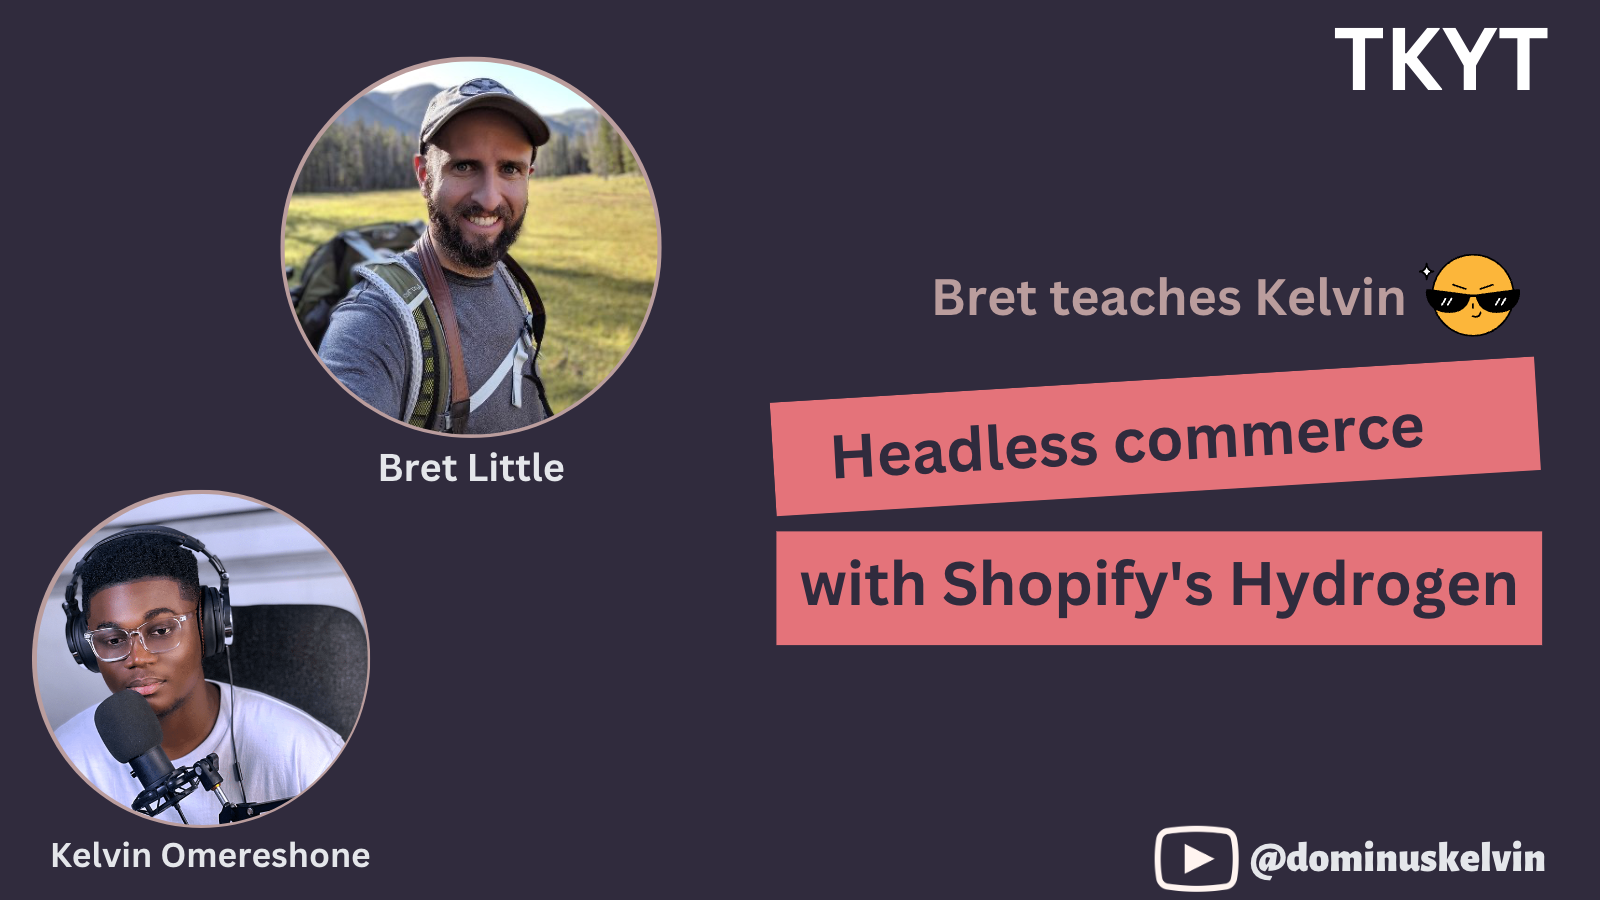 Headless commerce with Shopify's Hydrogen